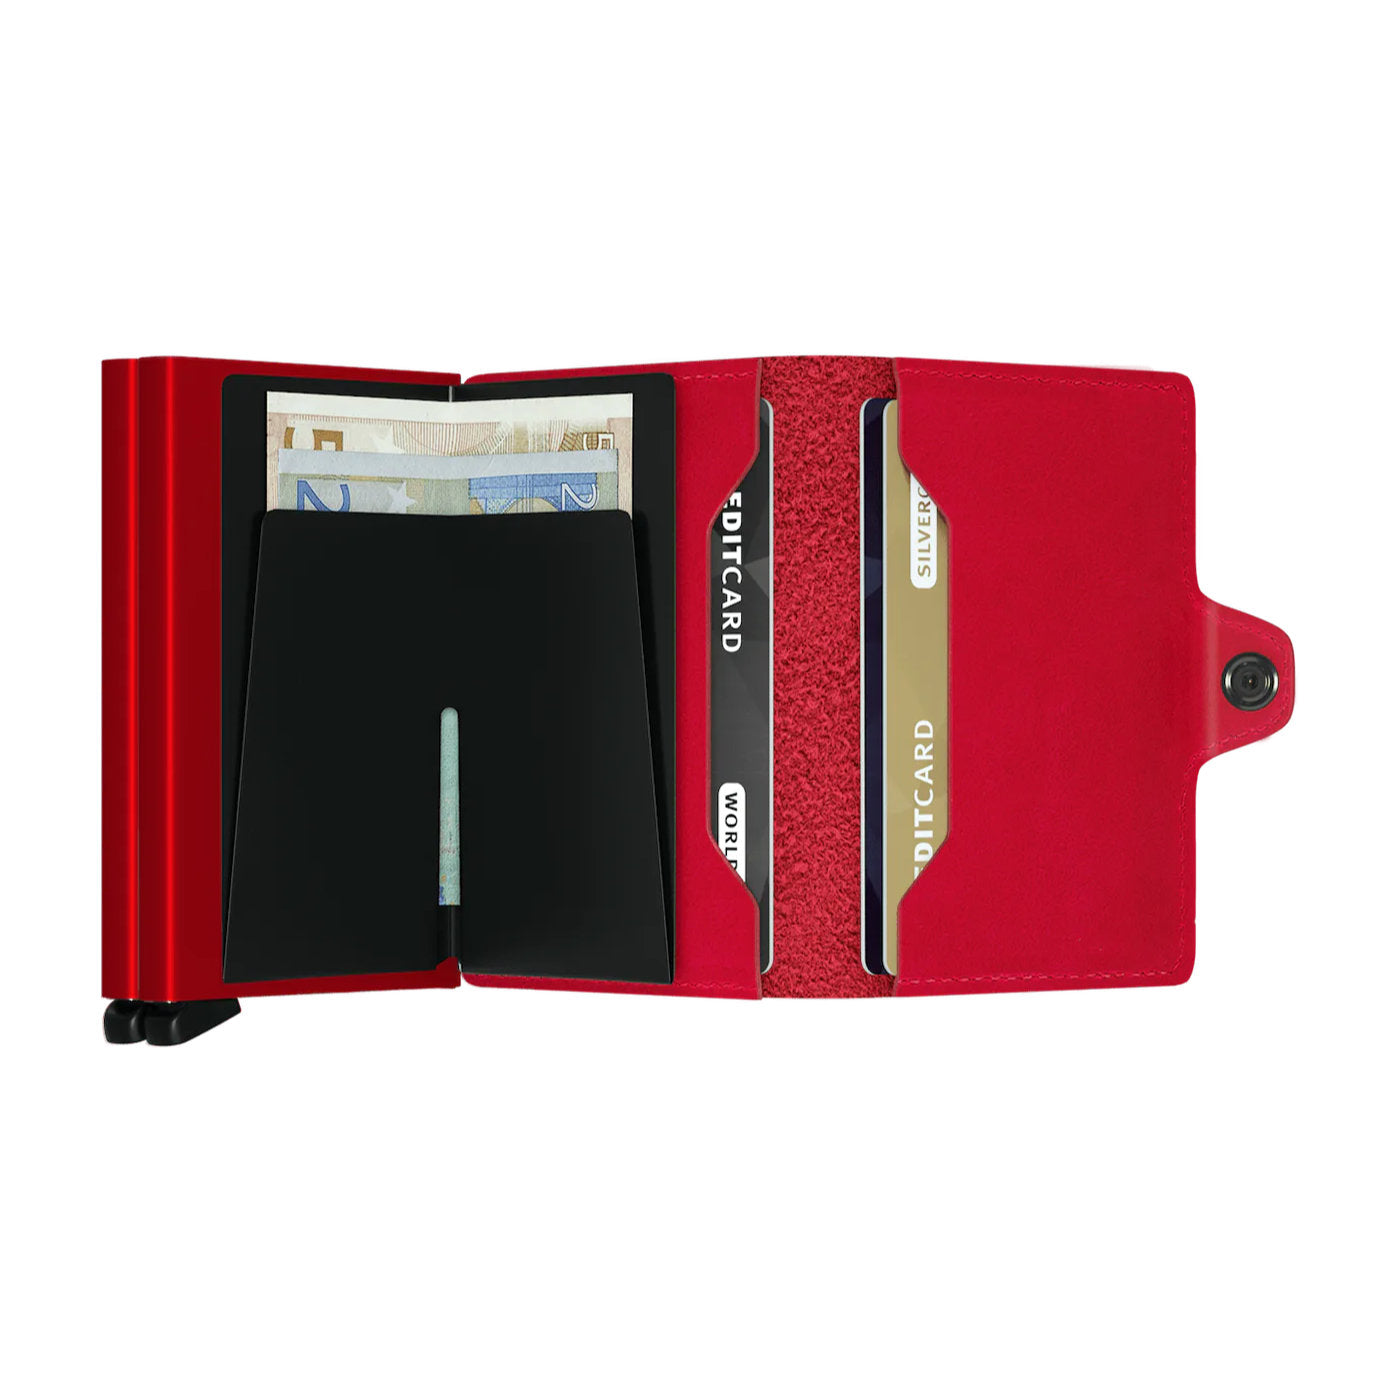 'Secrid Twinwallet - Original' in 'Red-Red' colour